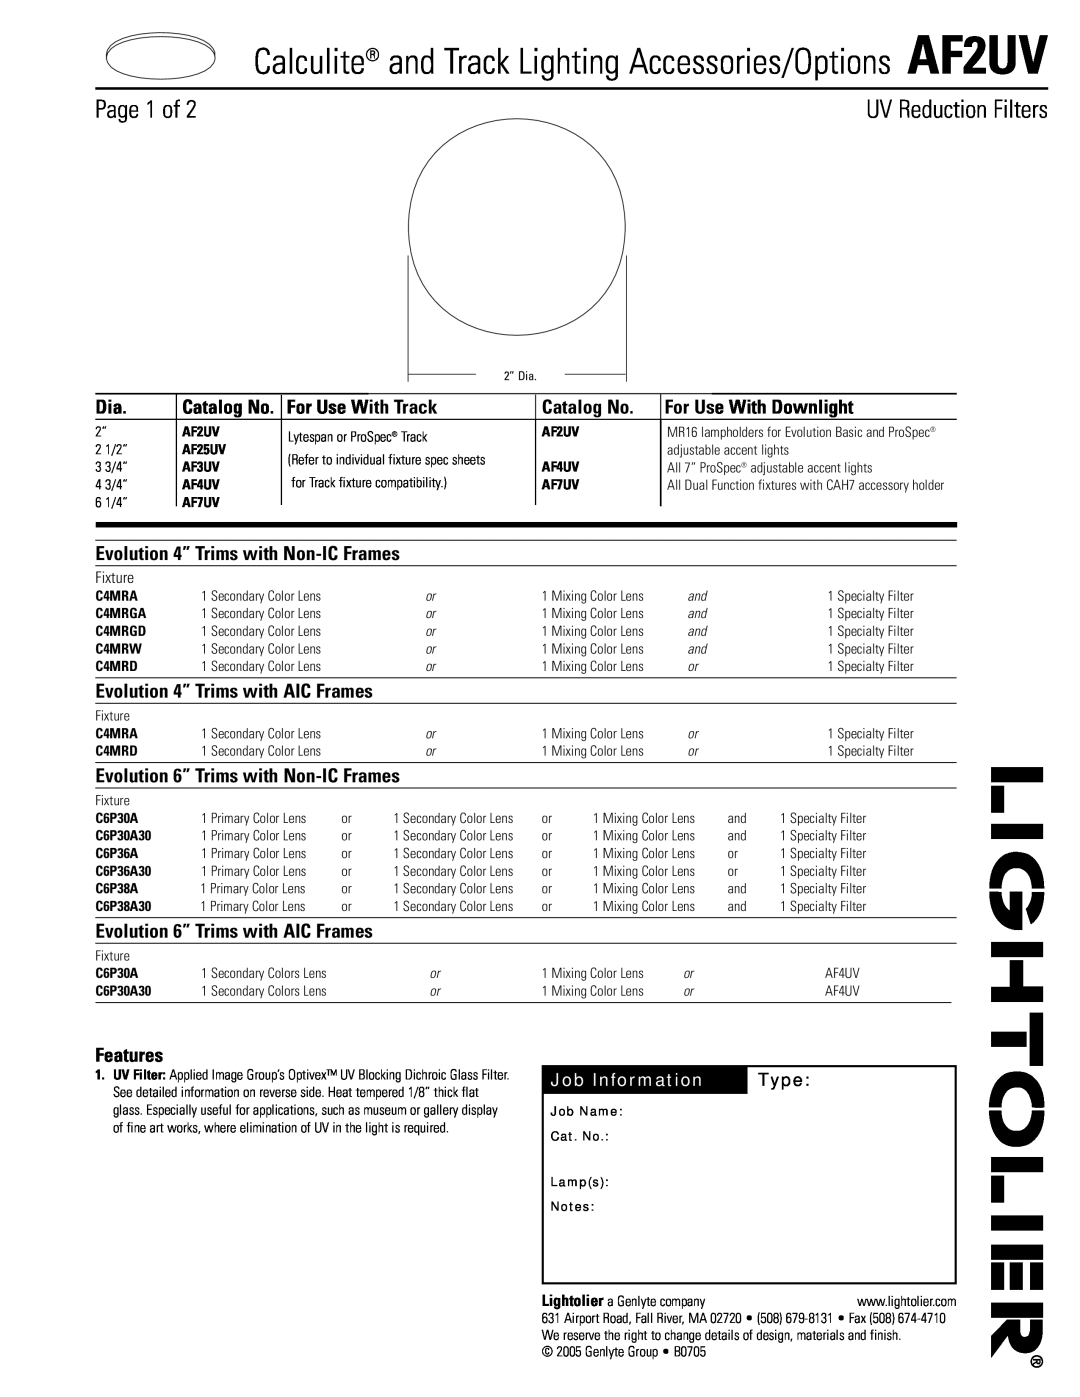 Lightolier AF2UV manual For Use With Track, Catalog No, For Use With Downlight, Evolution 4” Trims with Non-ICFrames, Type 